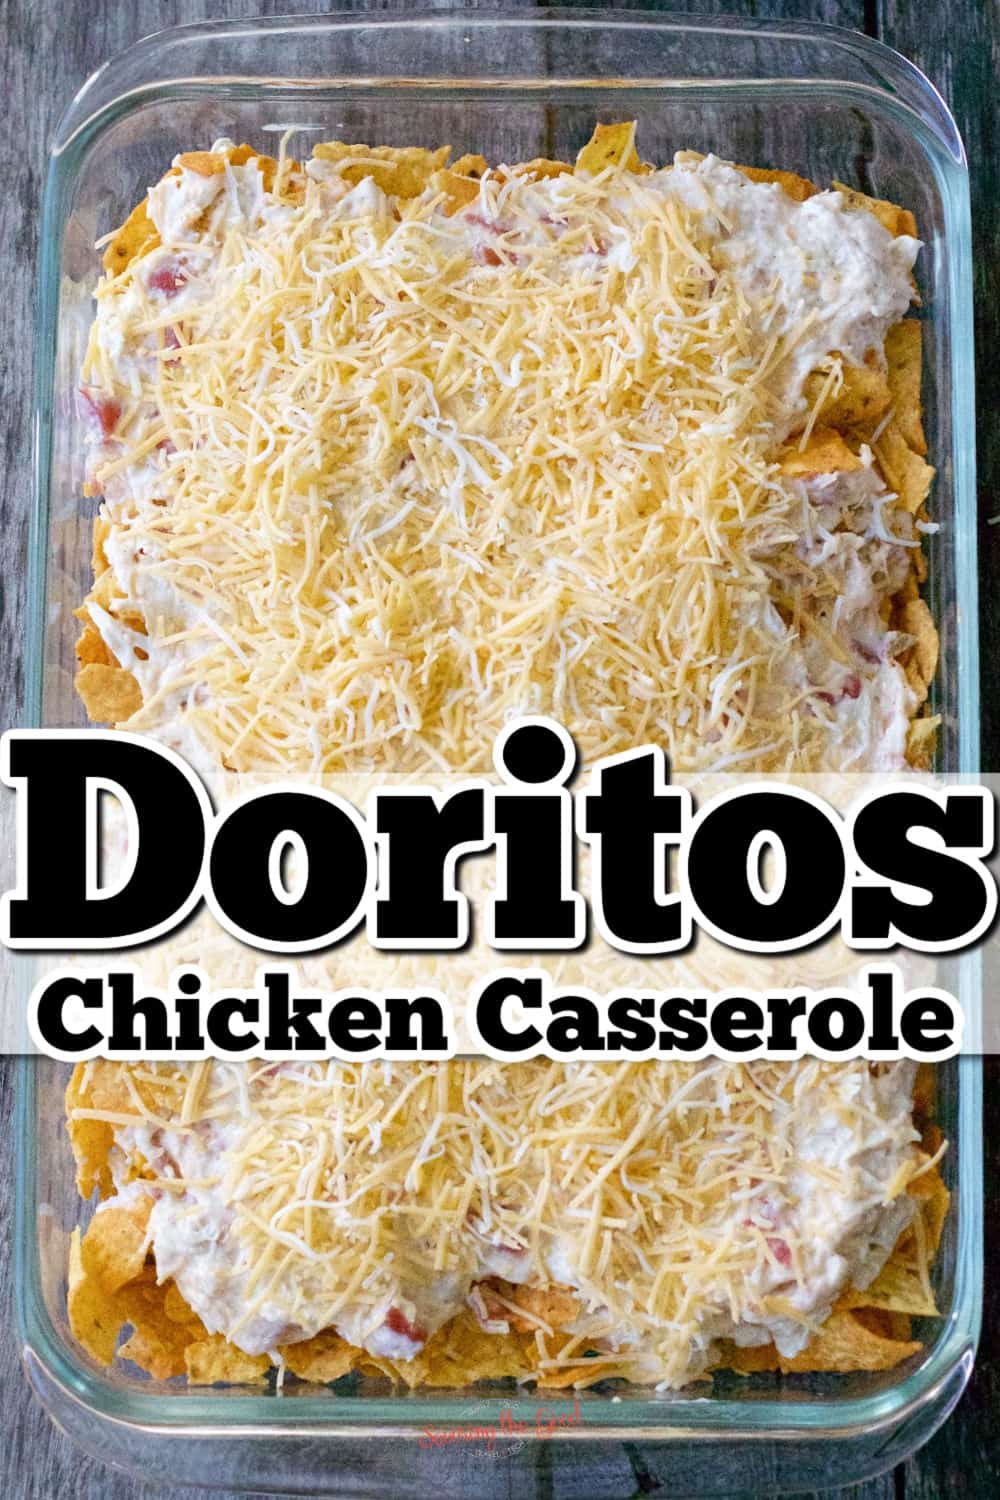 doritos chicken casserole image with text overlay for Pinterest.